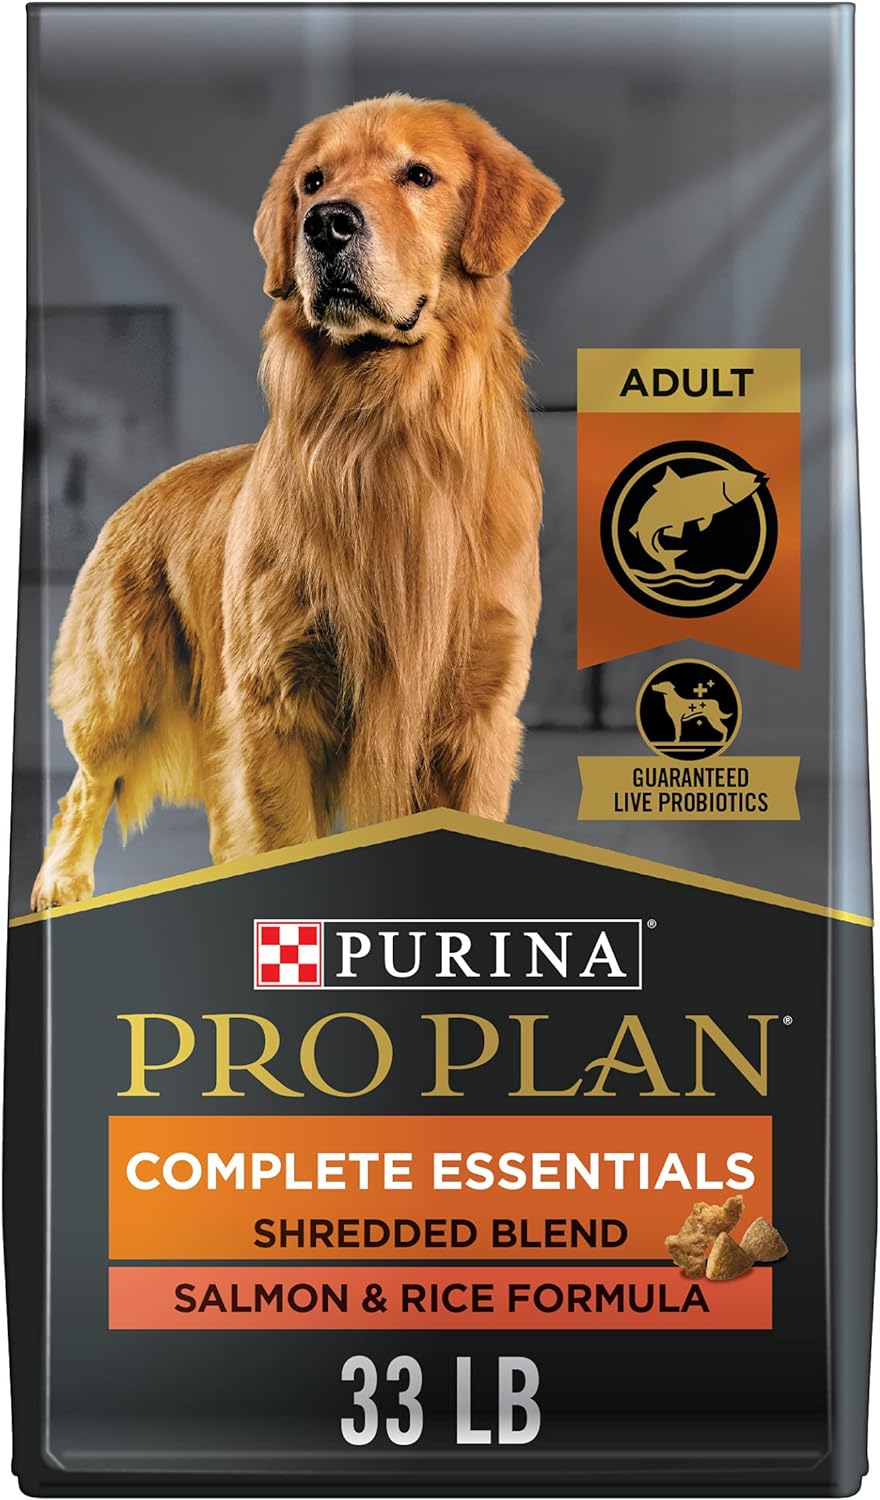 Purina Pro Plan High Protein Dog Food With Probiotics for Dogs, Shredded Blend Salmon & Rice Formula - 33 lb. Bag